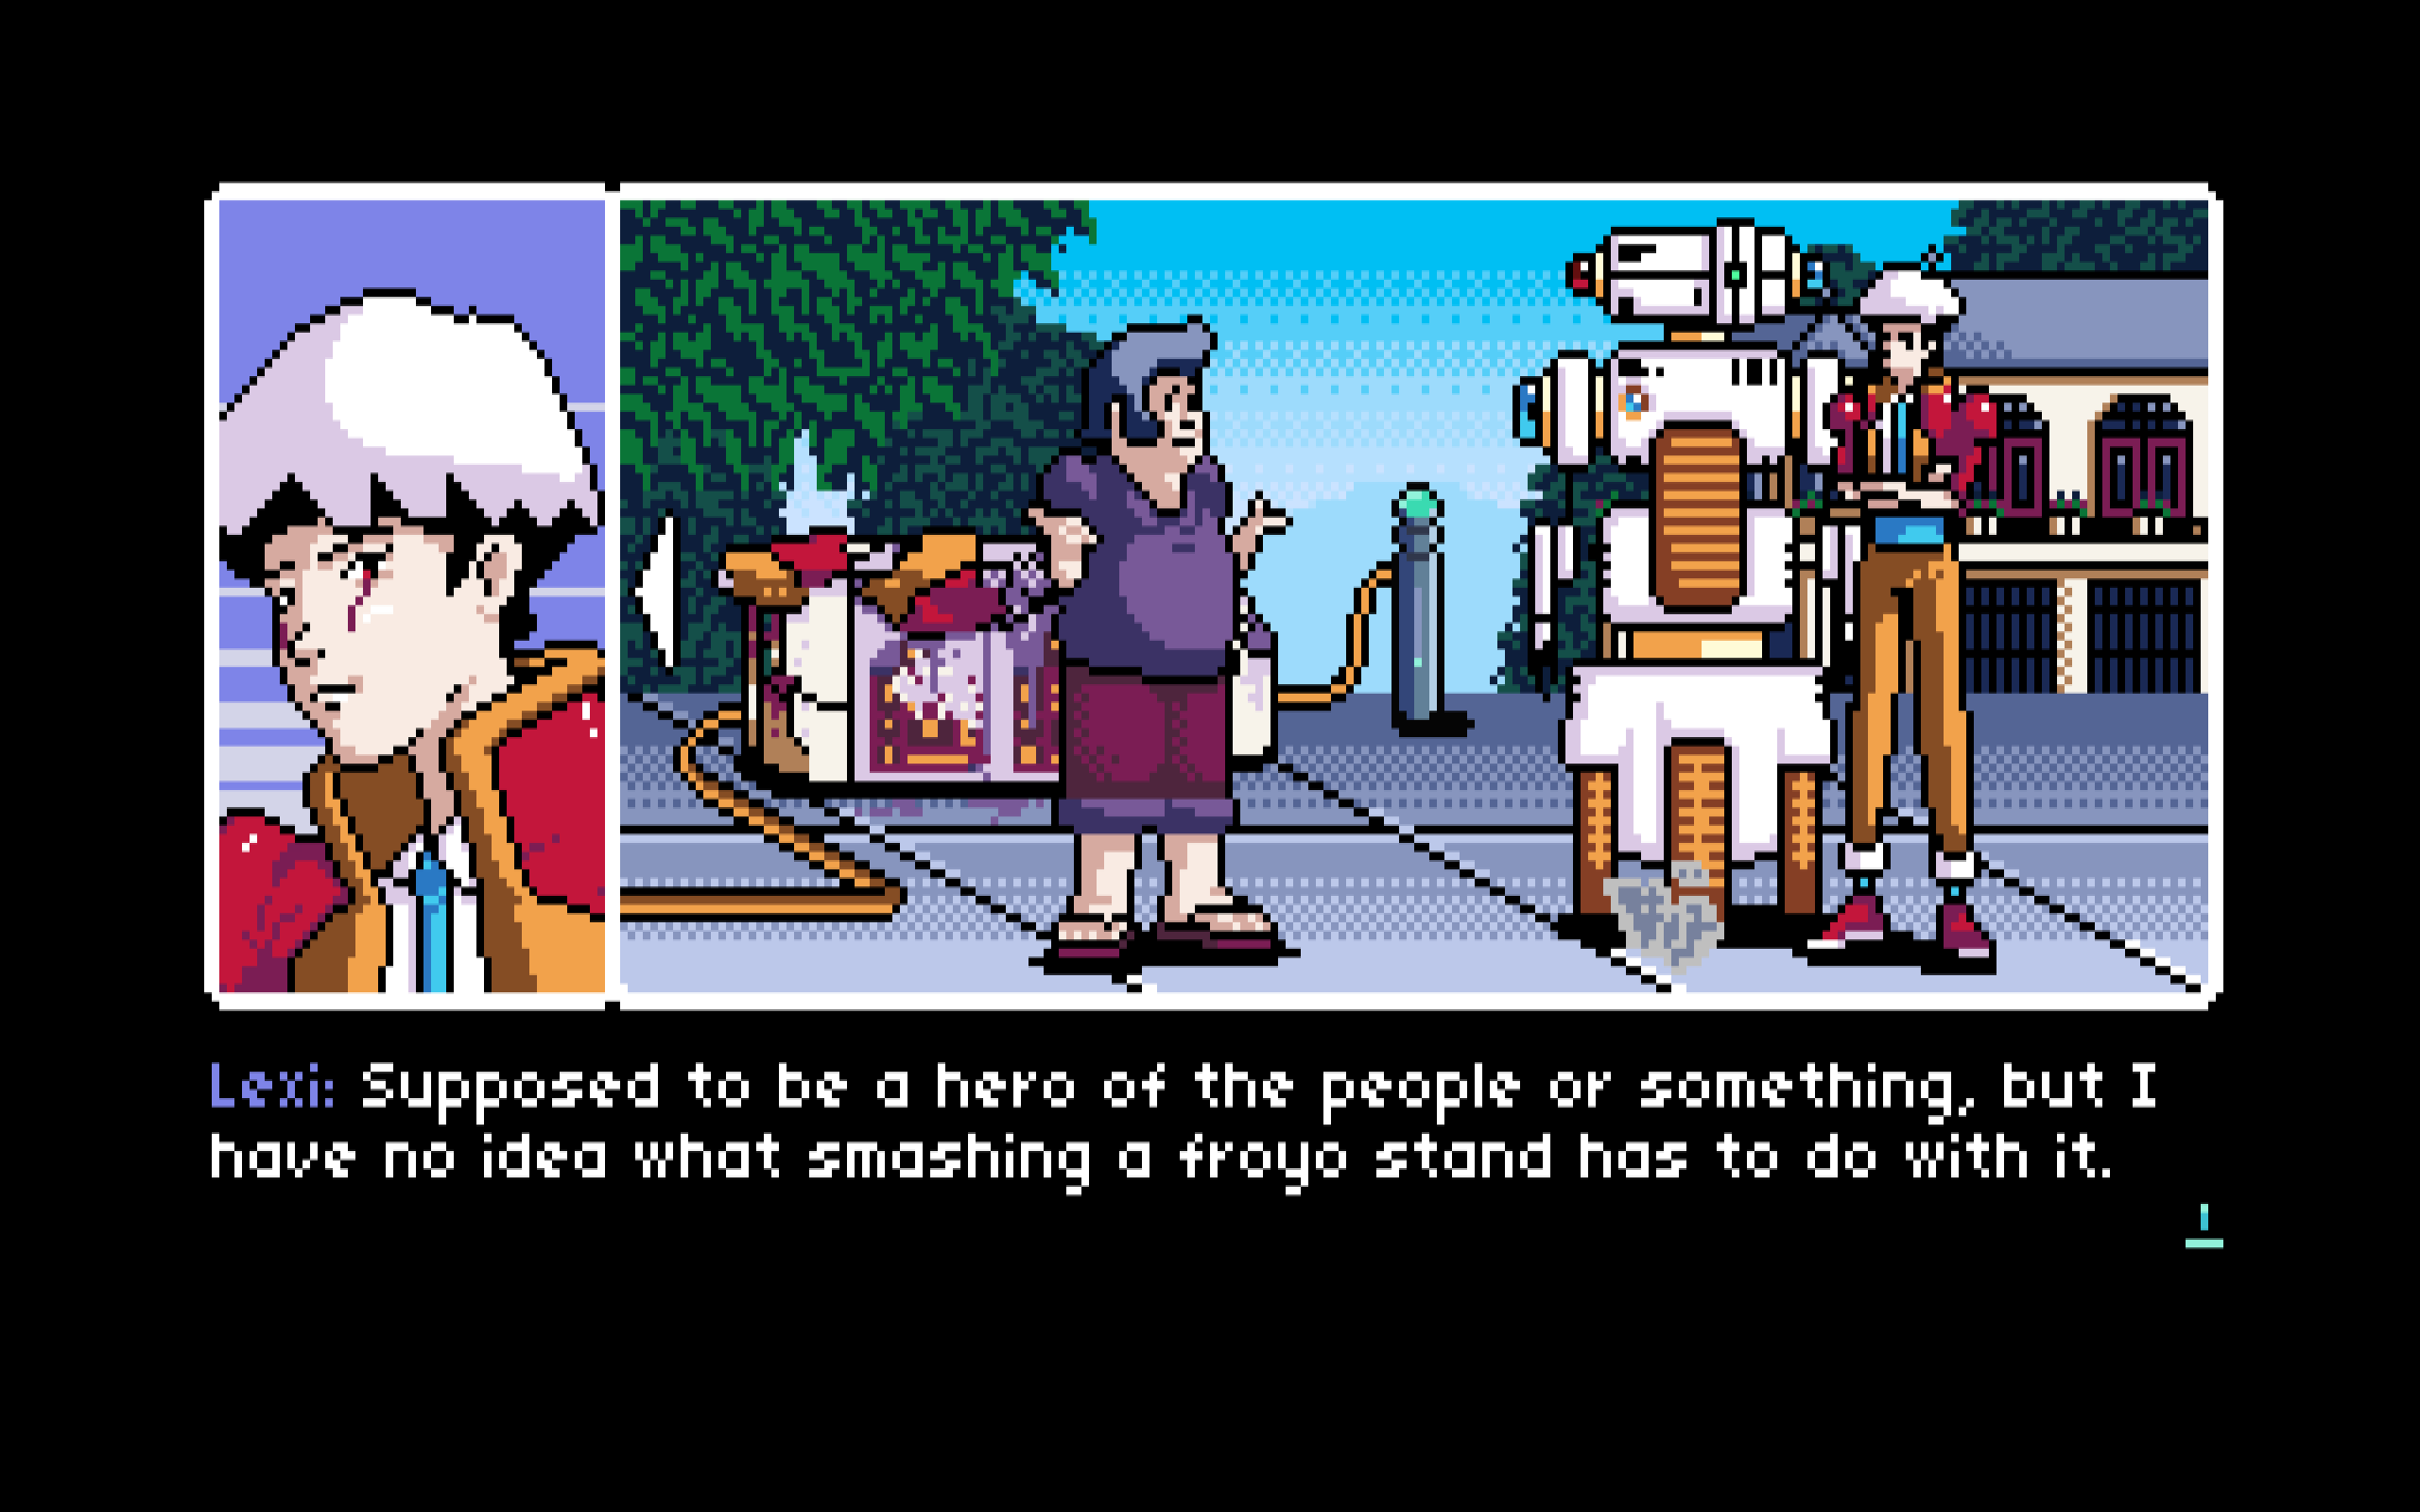 Read Only Memories #4